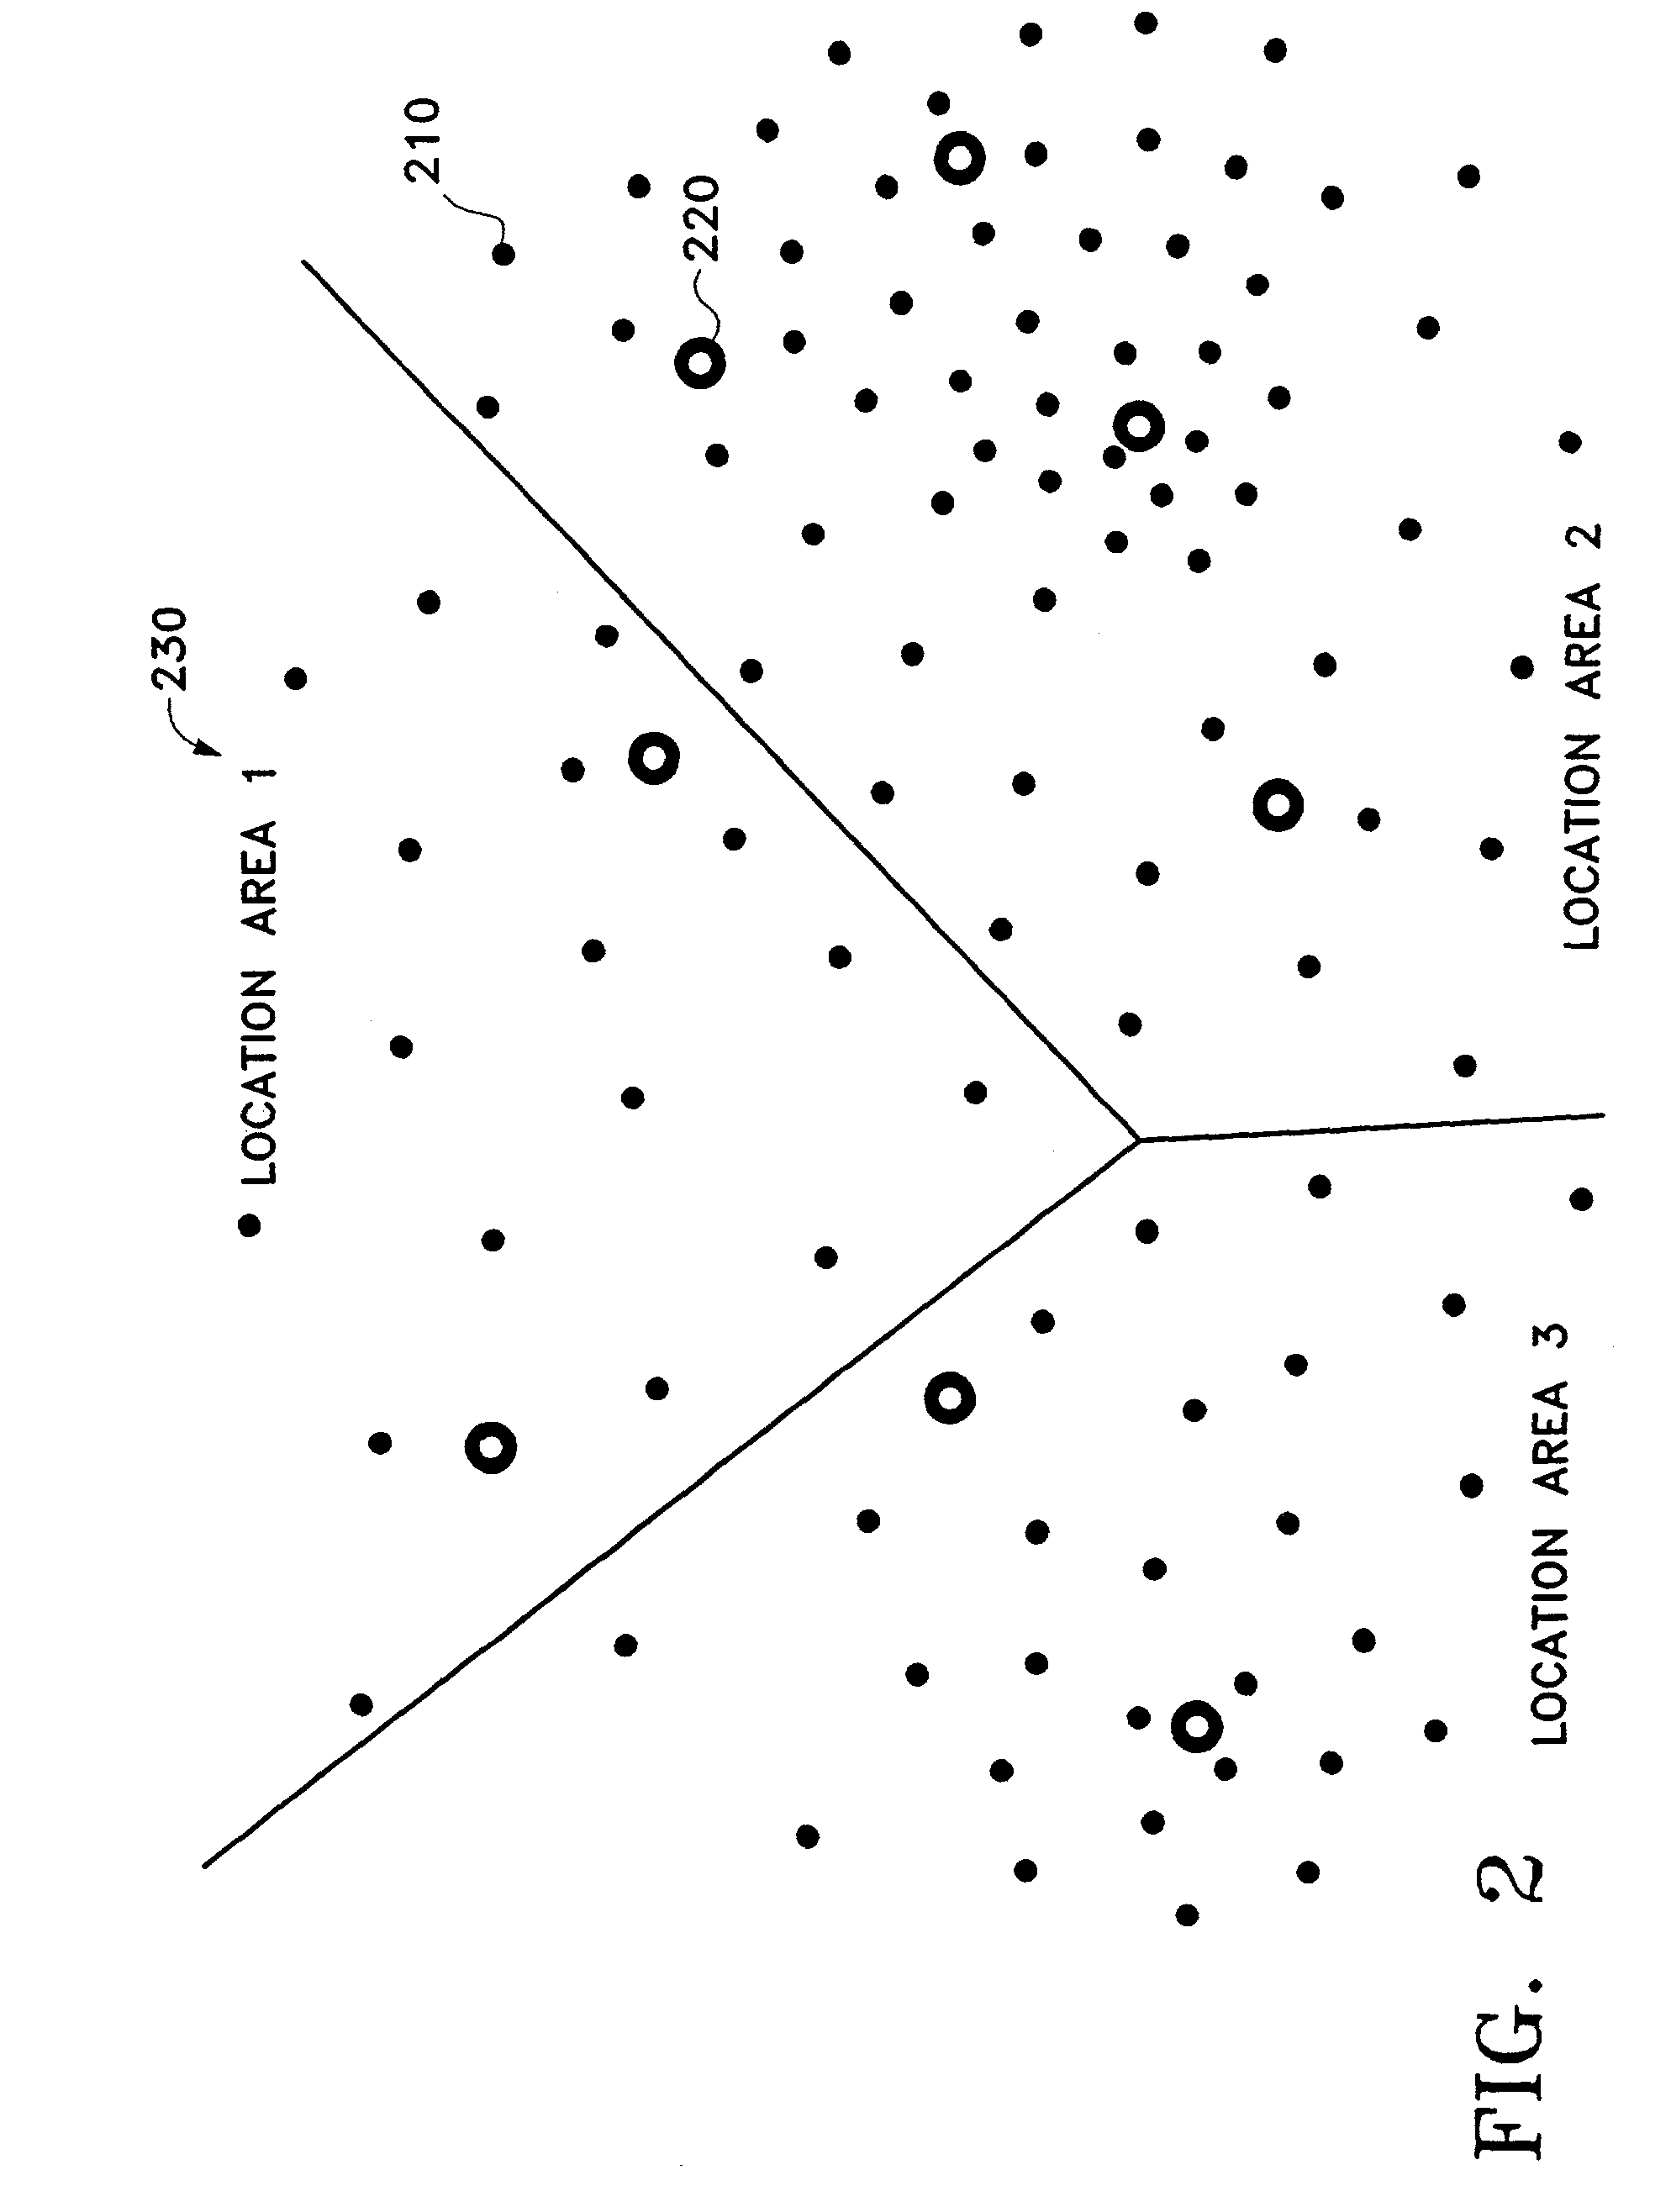 System and method for gathering data from wireless communications networks